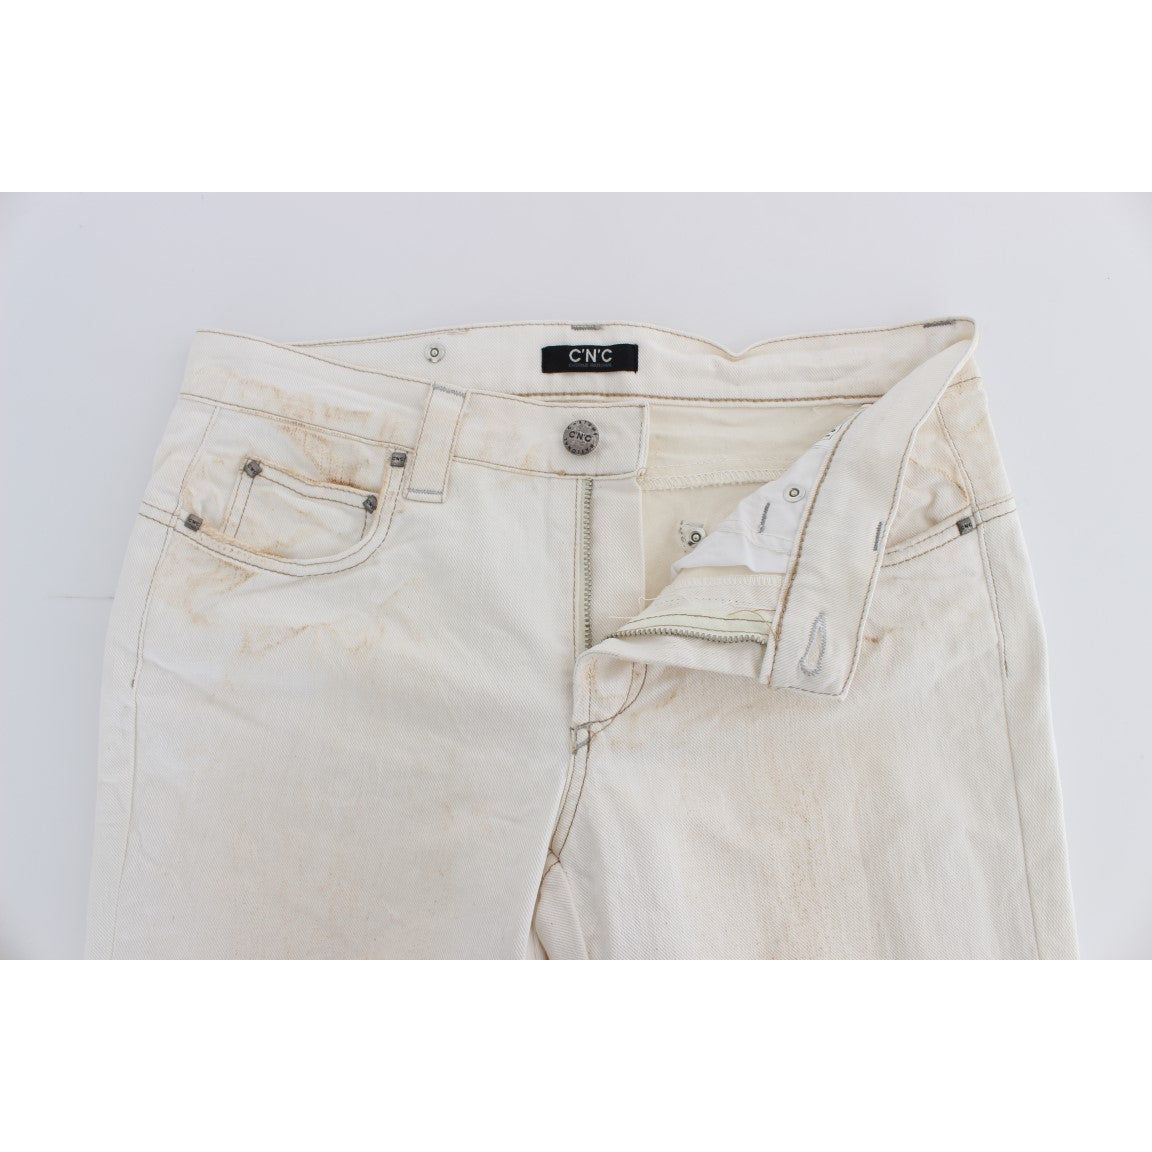 Costume National Chic White Slim Fit Designer Jeans white-cotton-slim-fit-bootcut-jeans